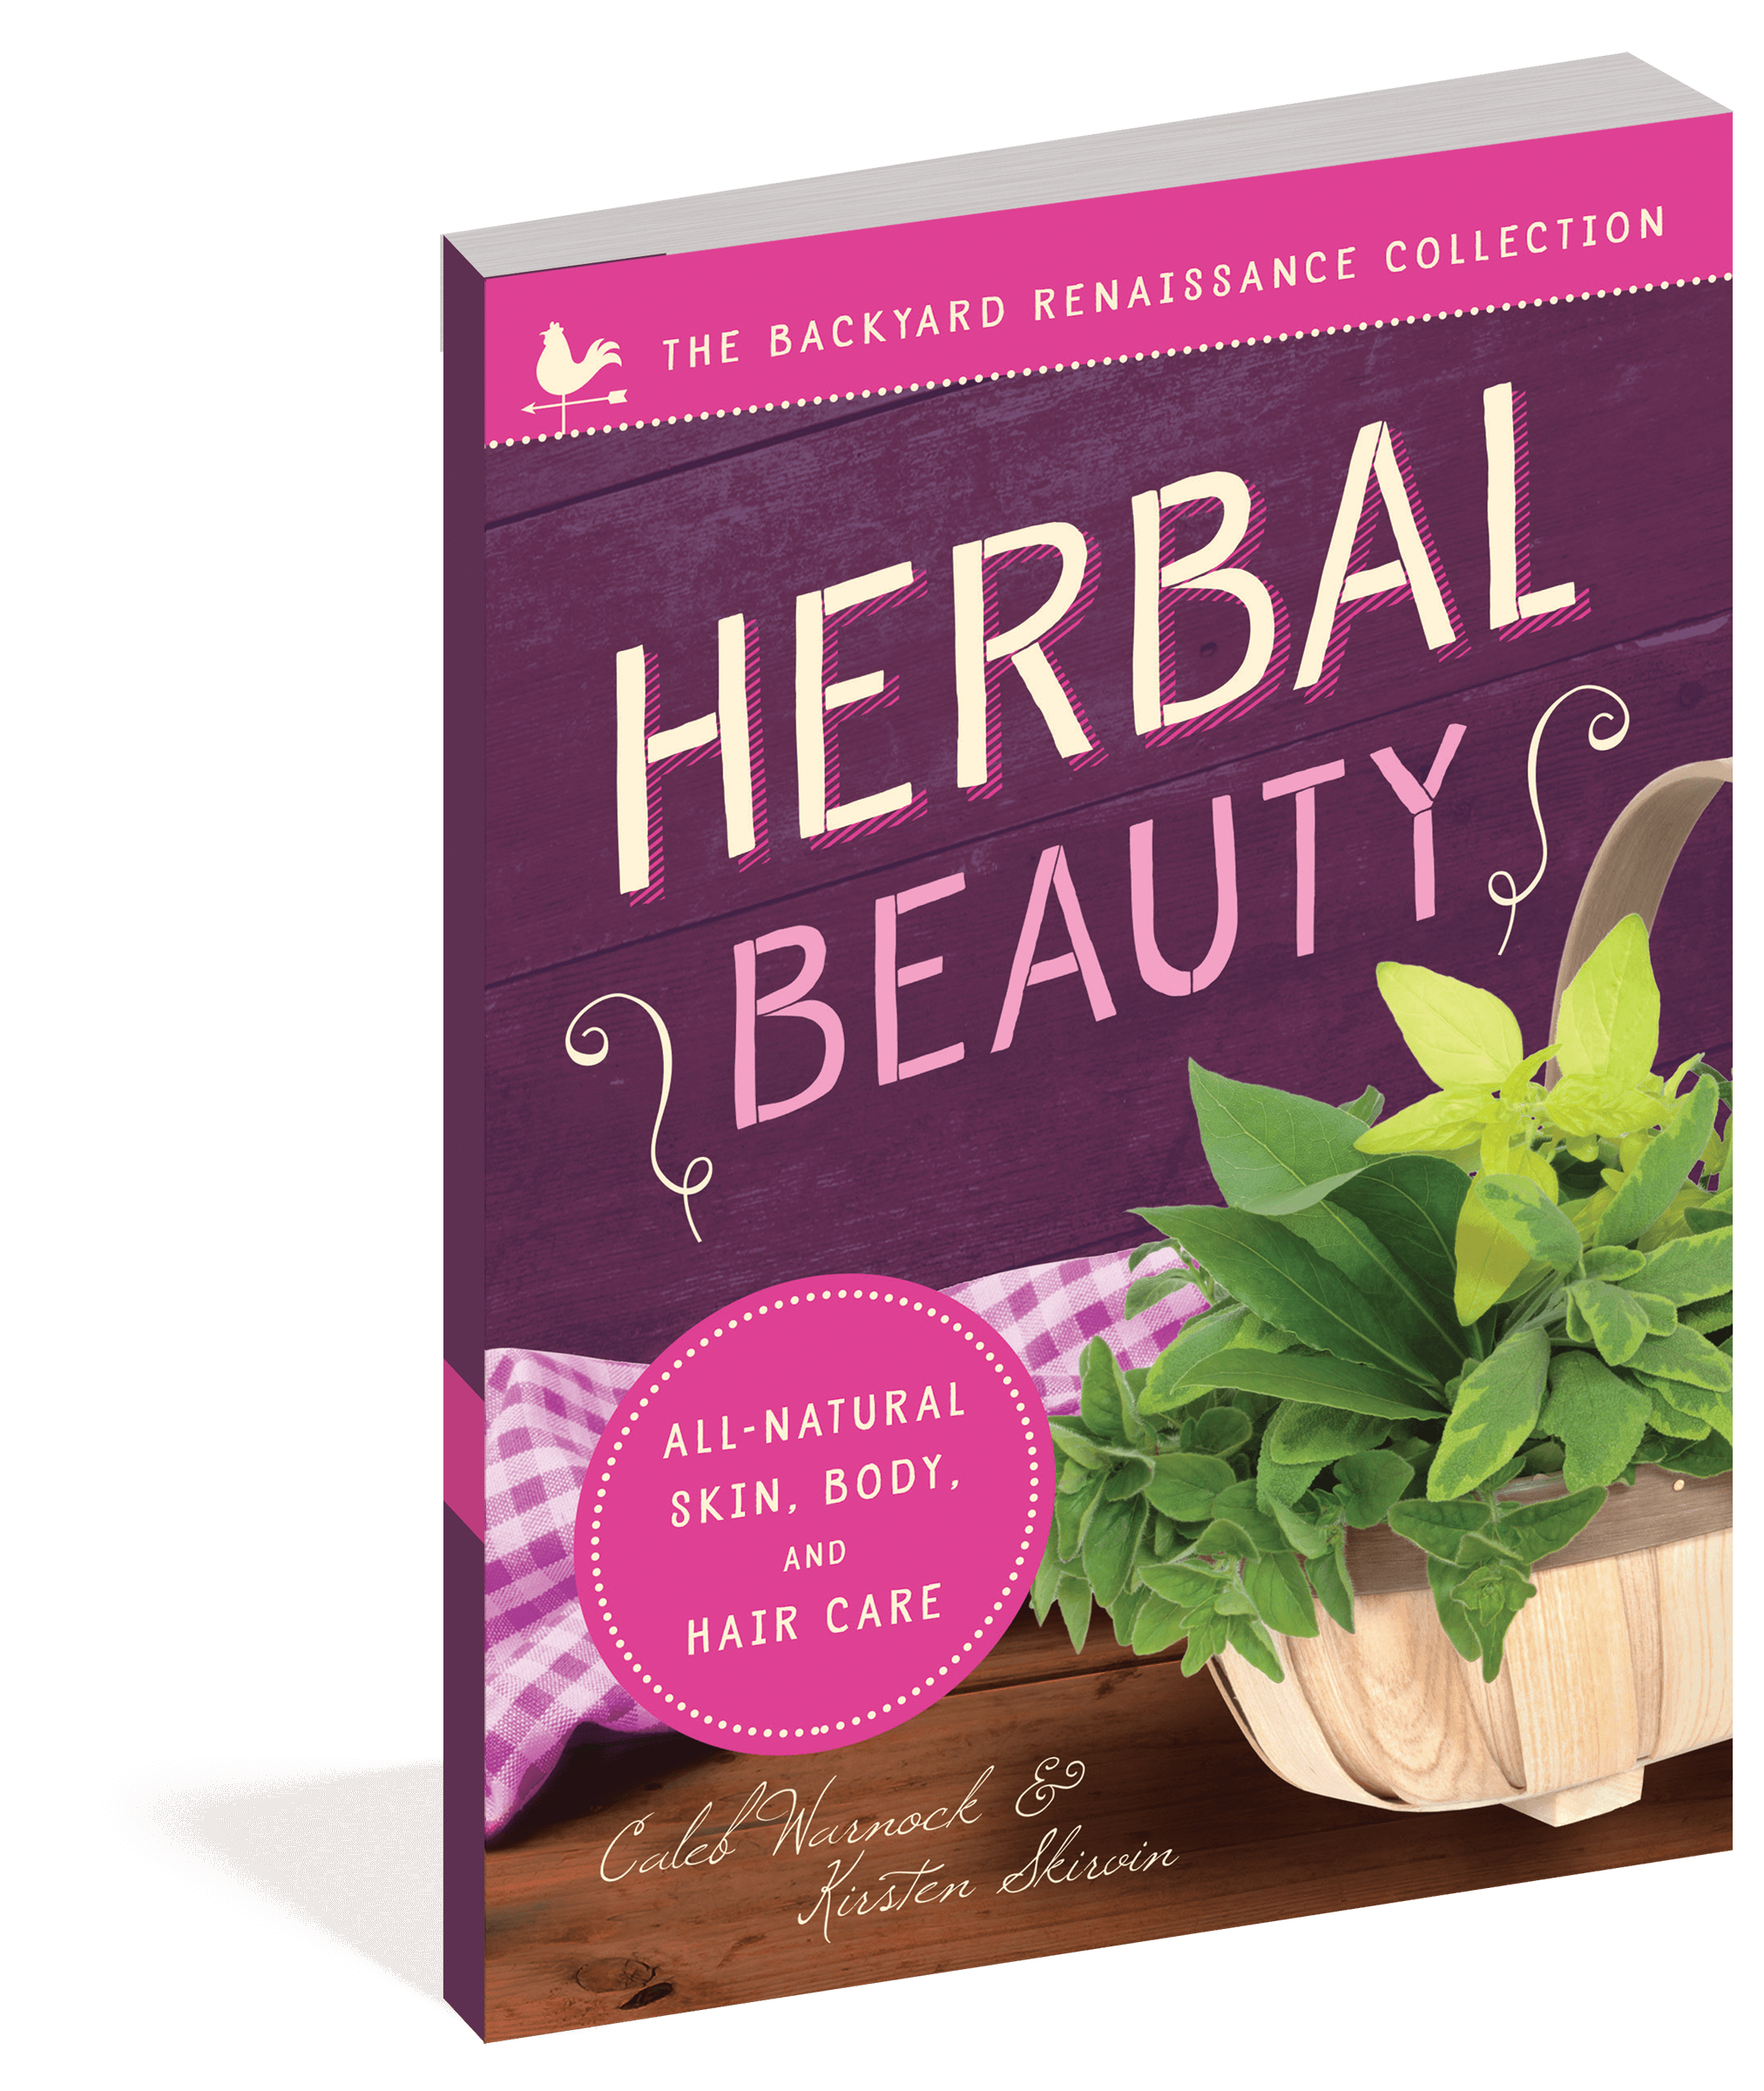 The cover of the book Herbal Beauty.